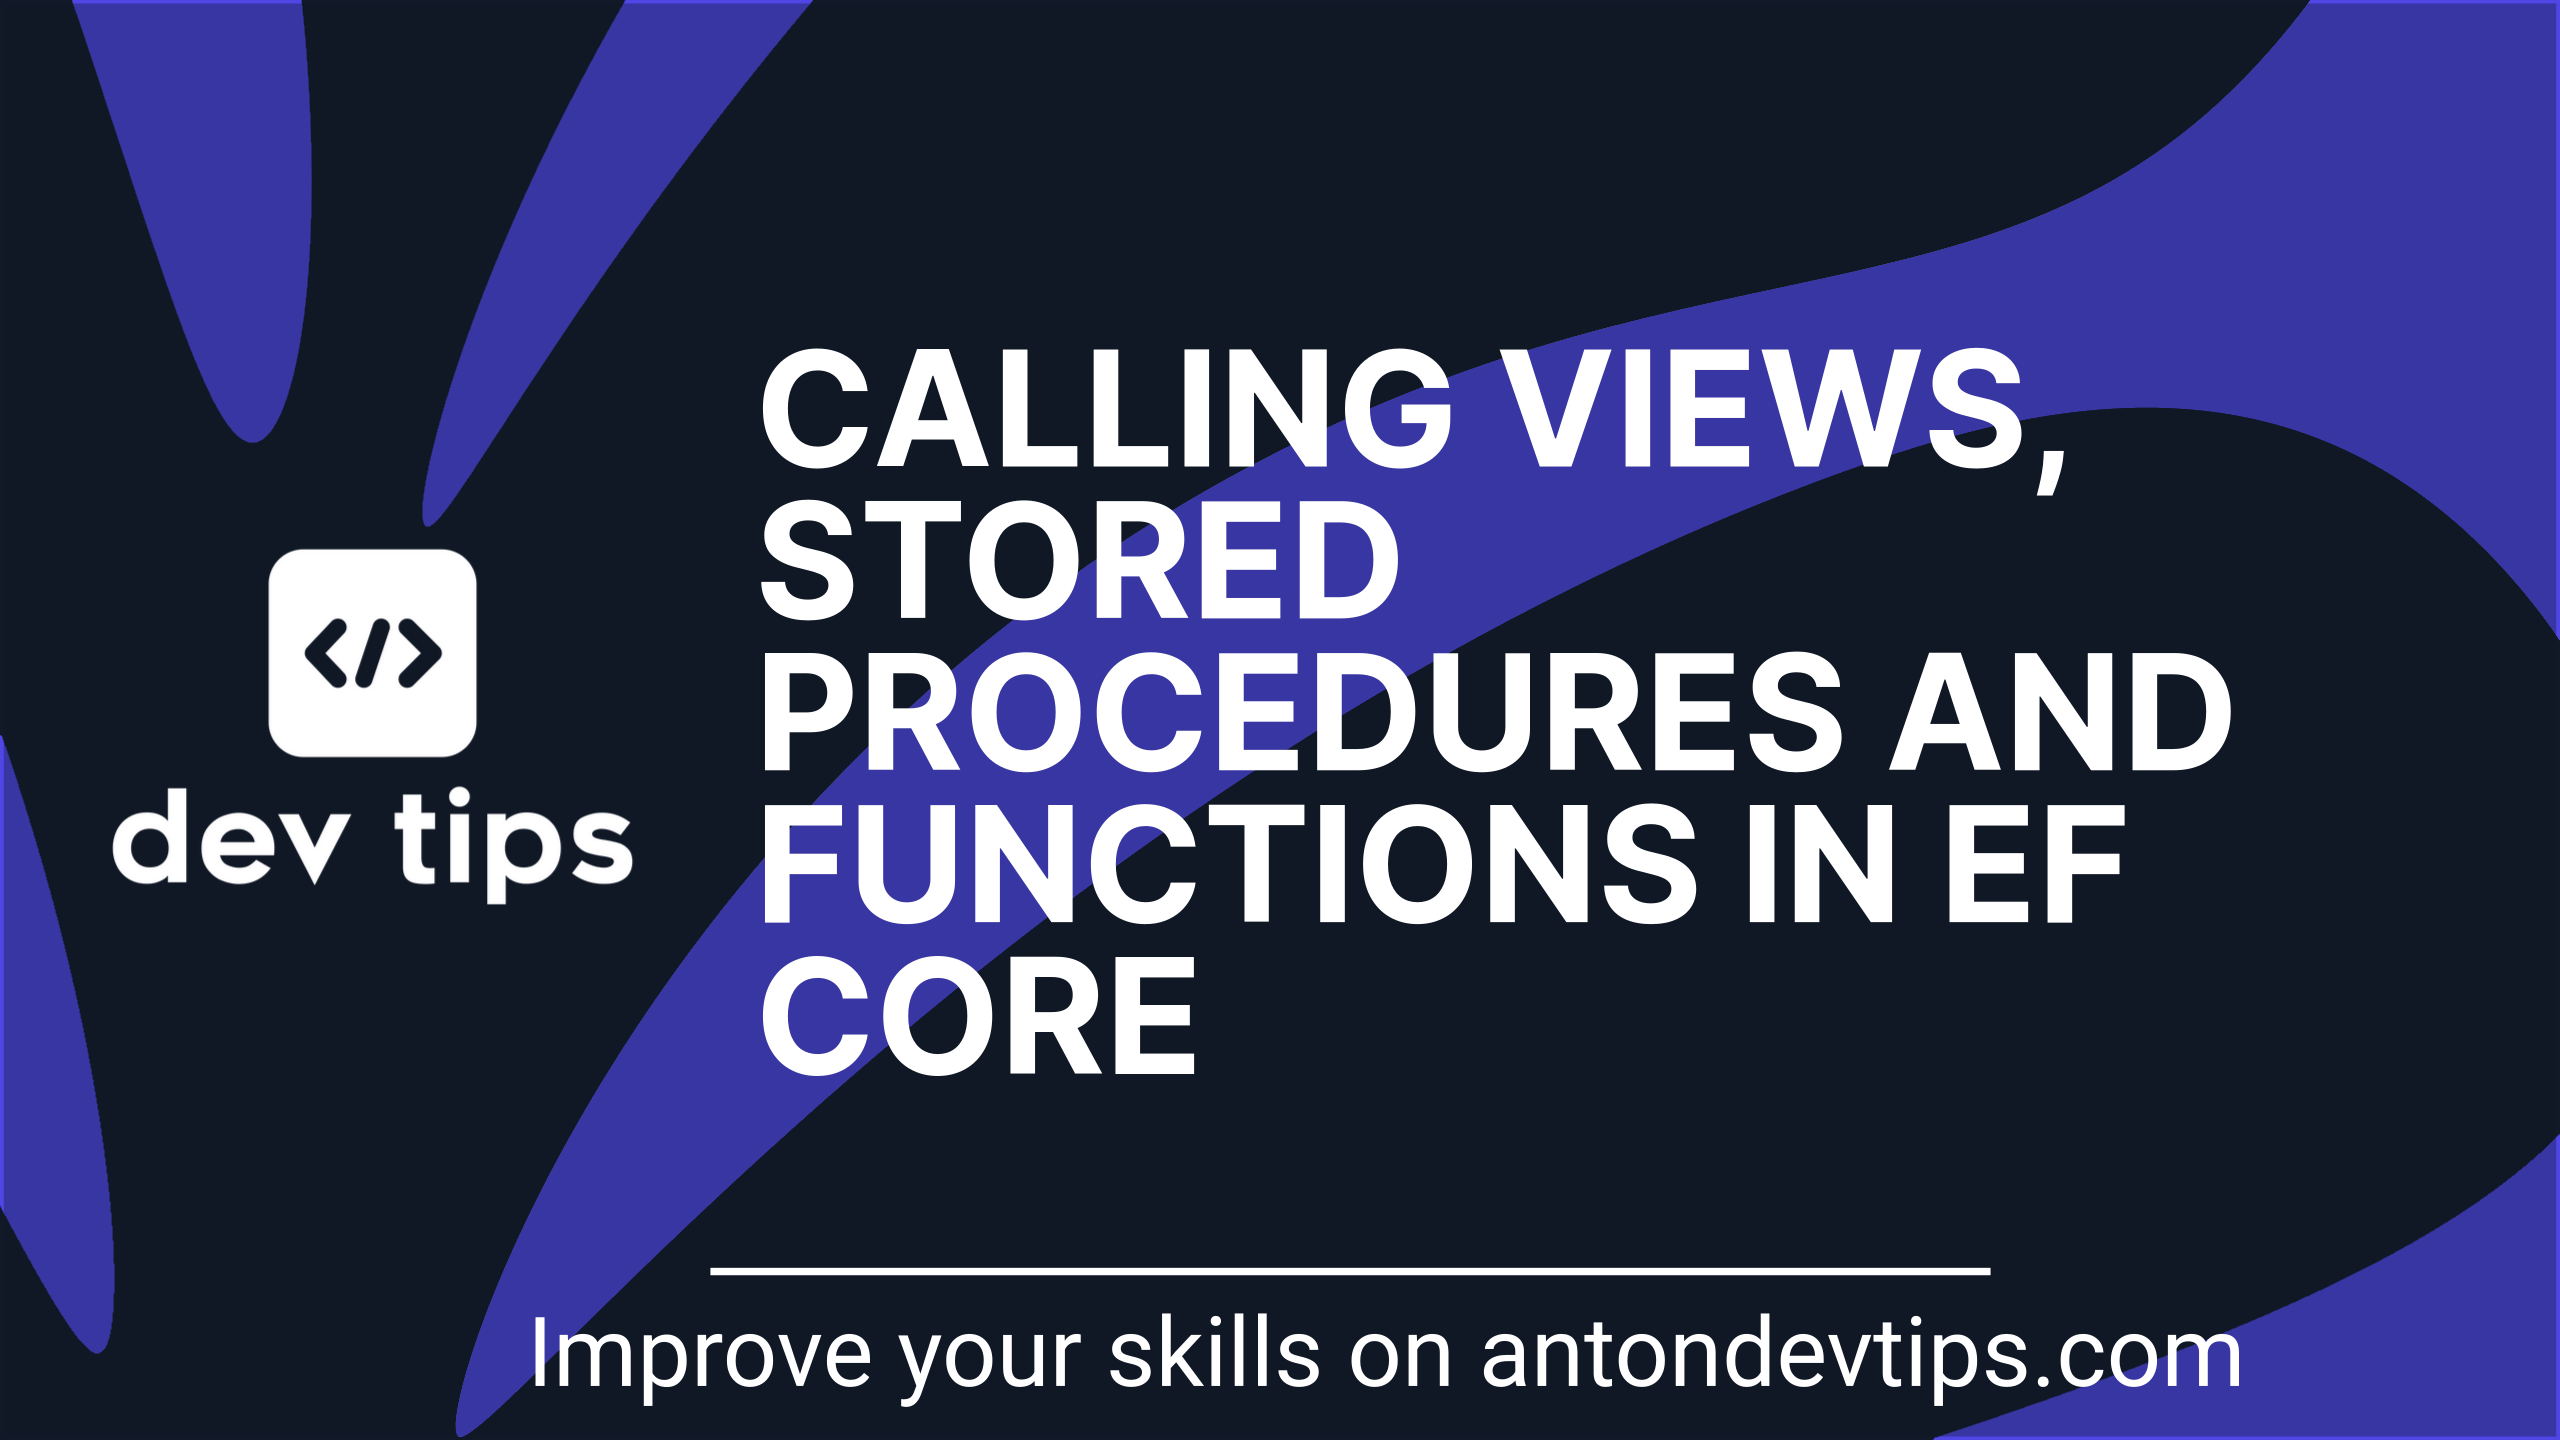 Calling Views, Stored Procedures and Functions in EF Core